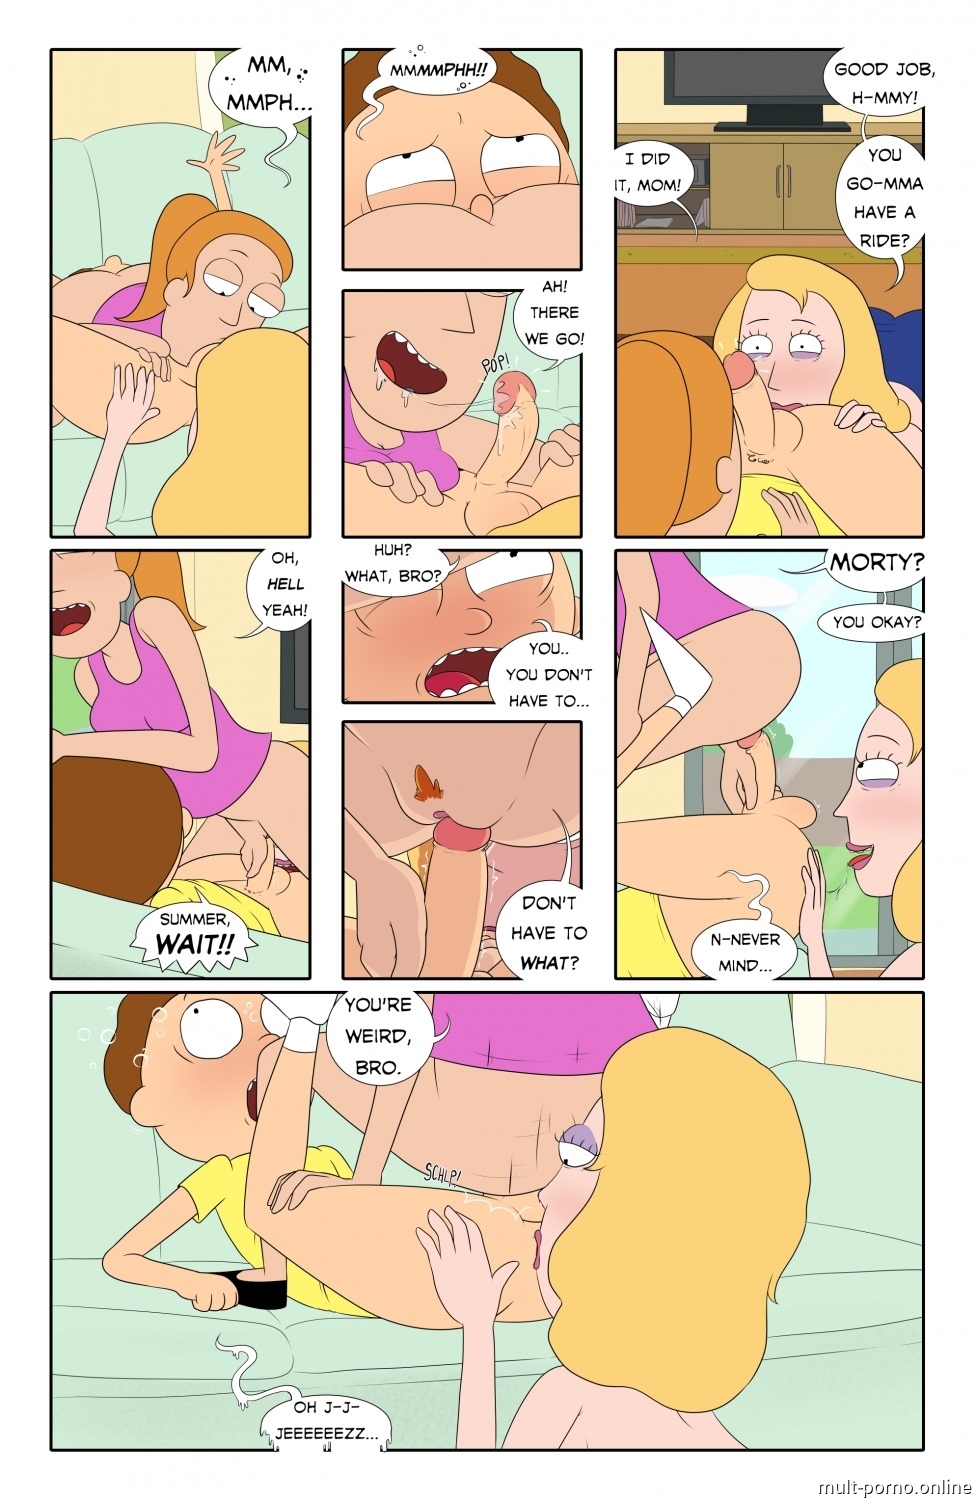 How to divorce a mom in a Rick and Morty porn game (+porn game & comics)